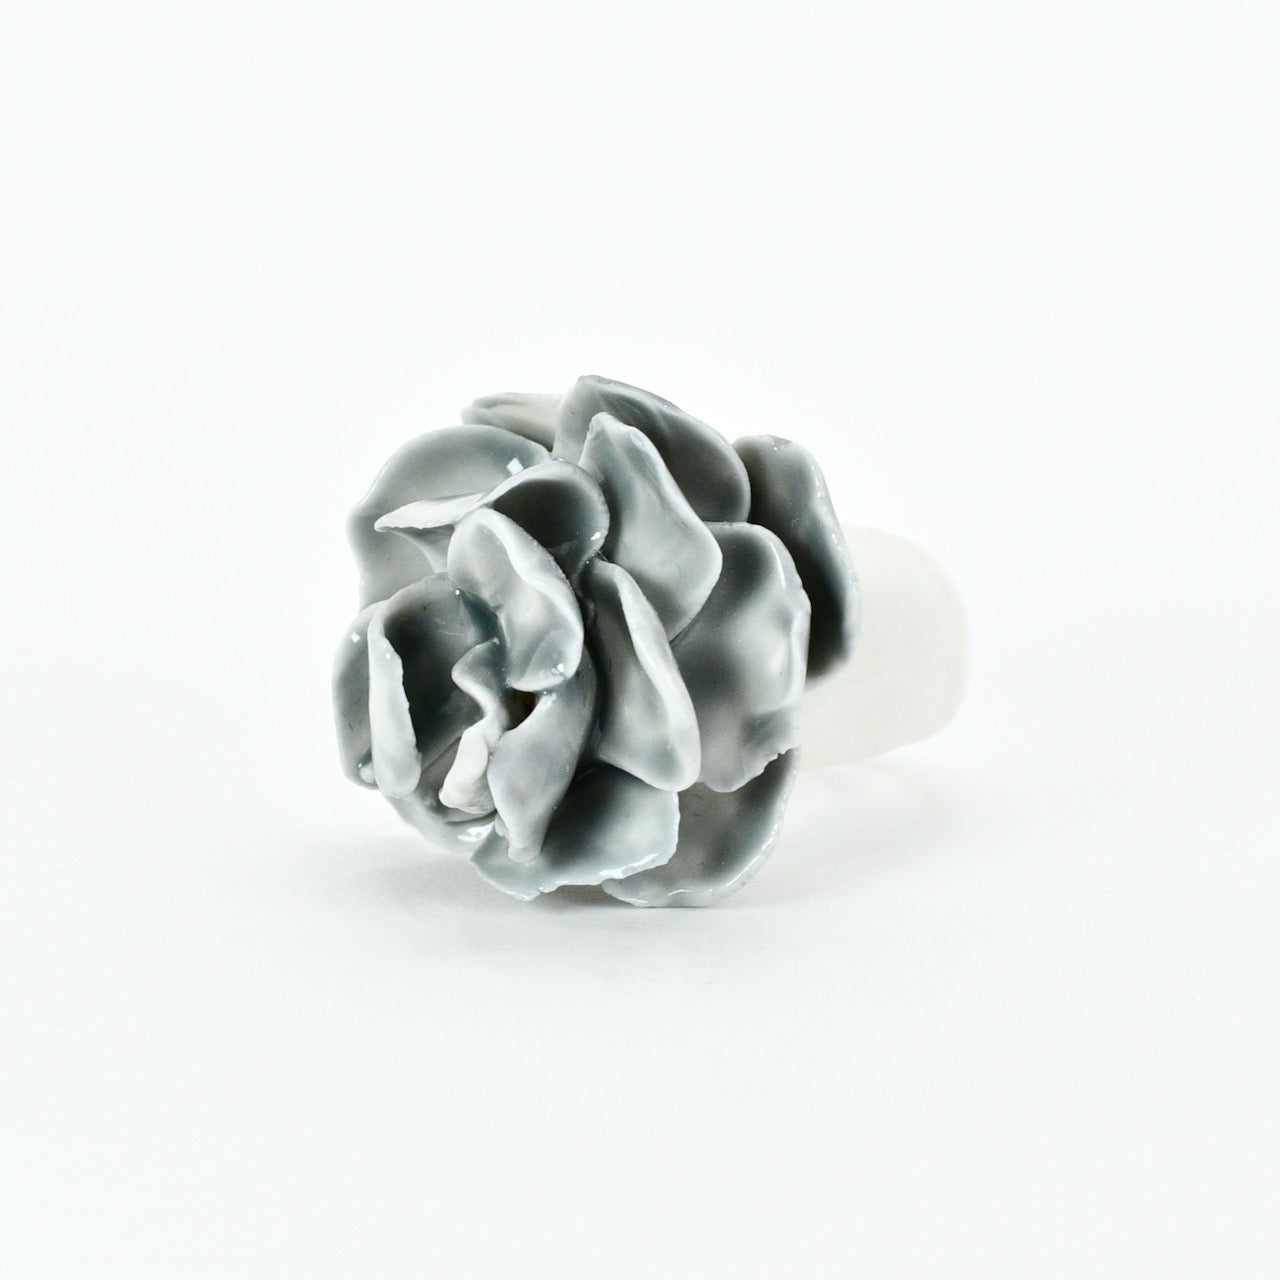 Farphoria_Porcelain_Ring_Cloudy_Gray_Rose_hand_jewelry